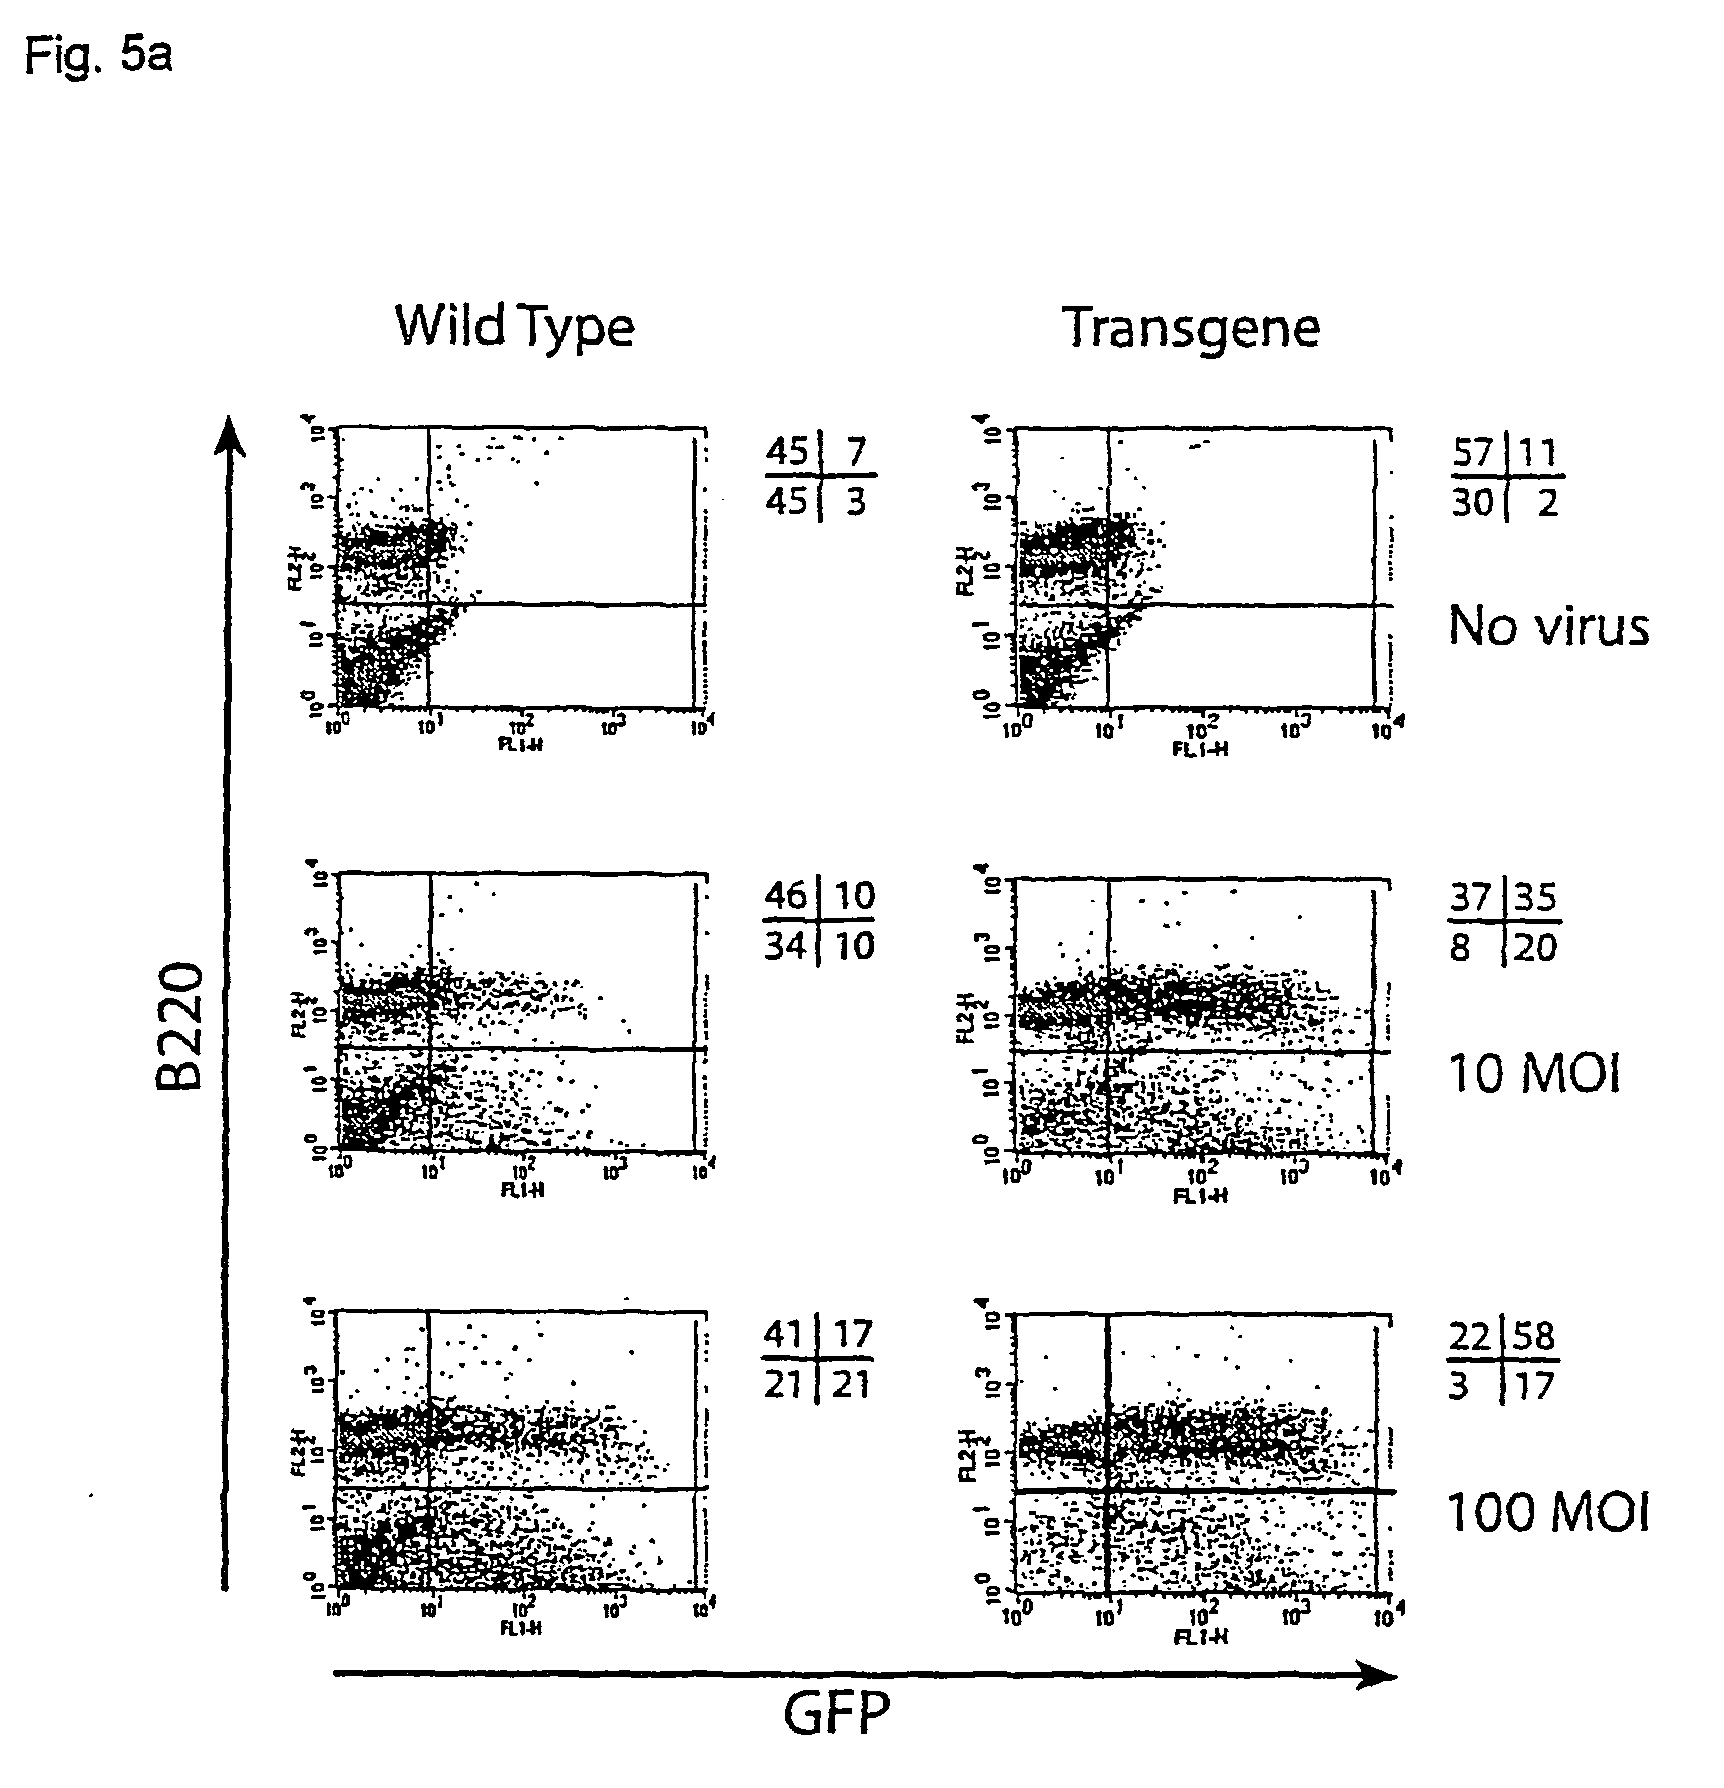 Method of obtaining a non-human mammal susceptible to adenovirus-mediated gene delivery, a method for such delivery, and a non-human mammal susceptible to such delivery